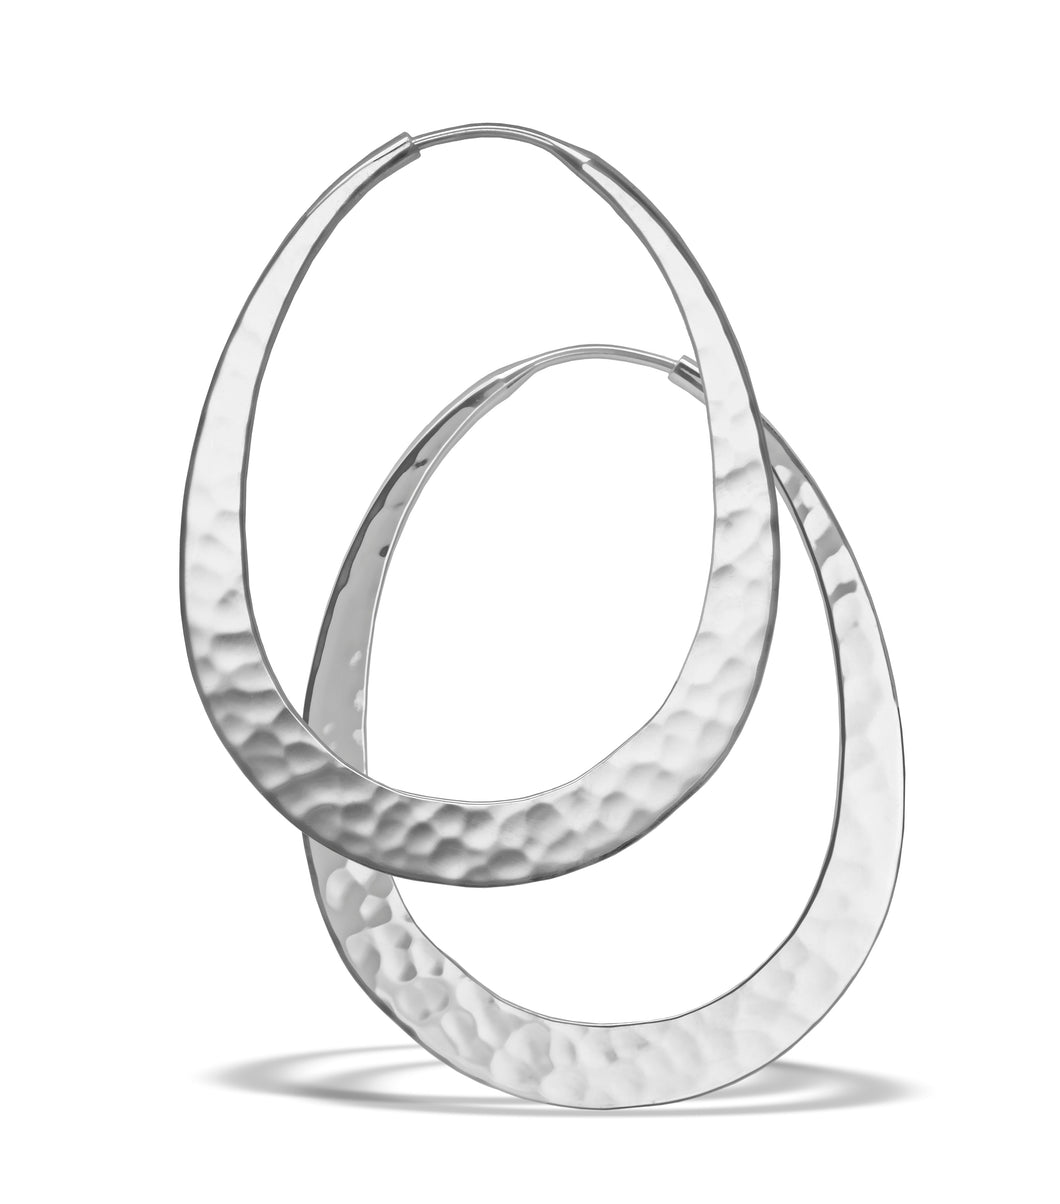 40 mm Oval Eclipse Hoops